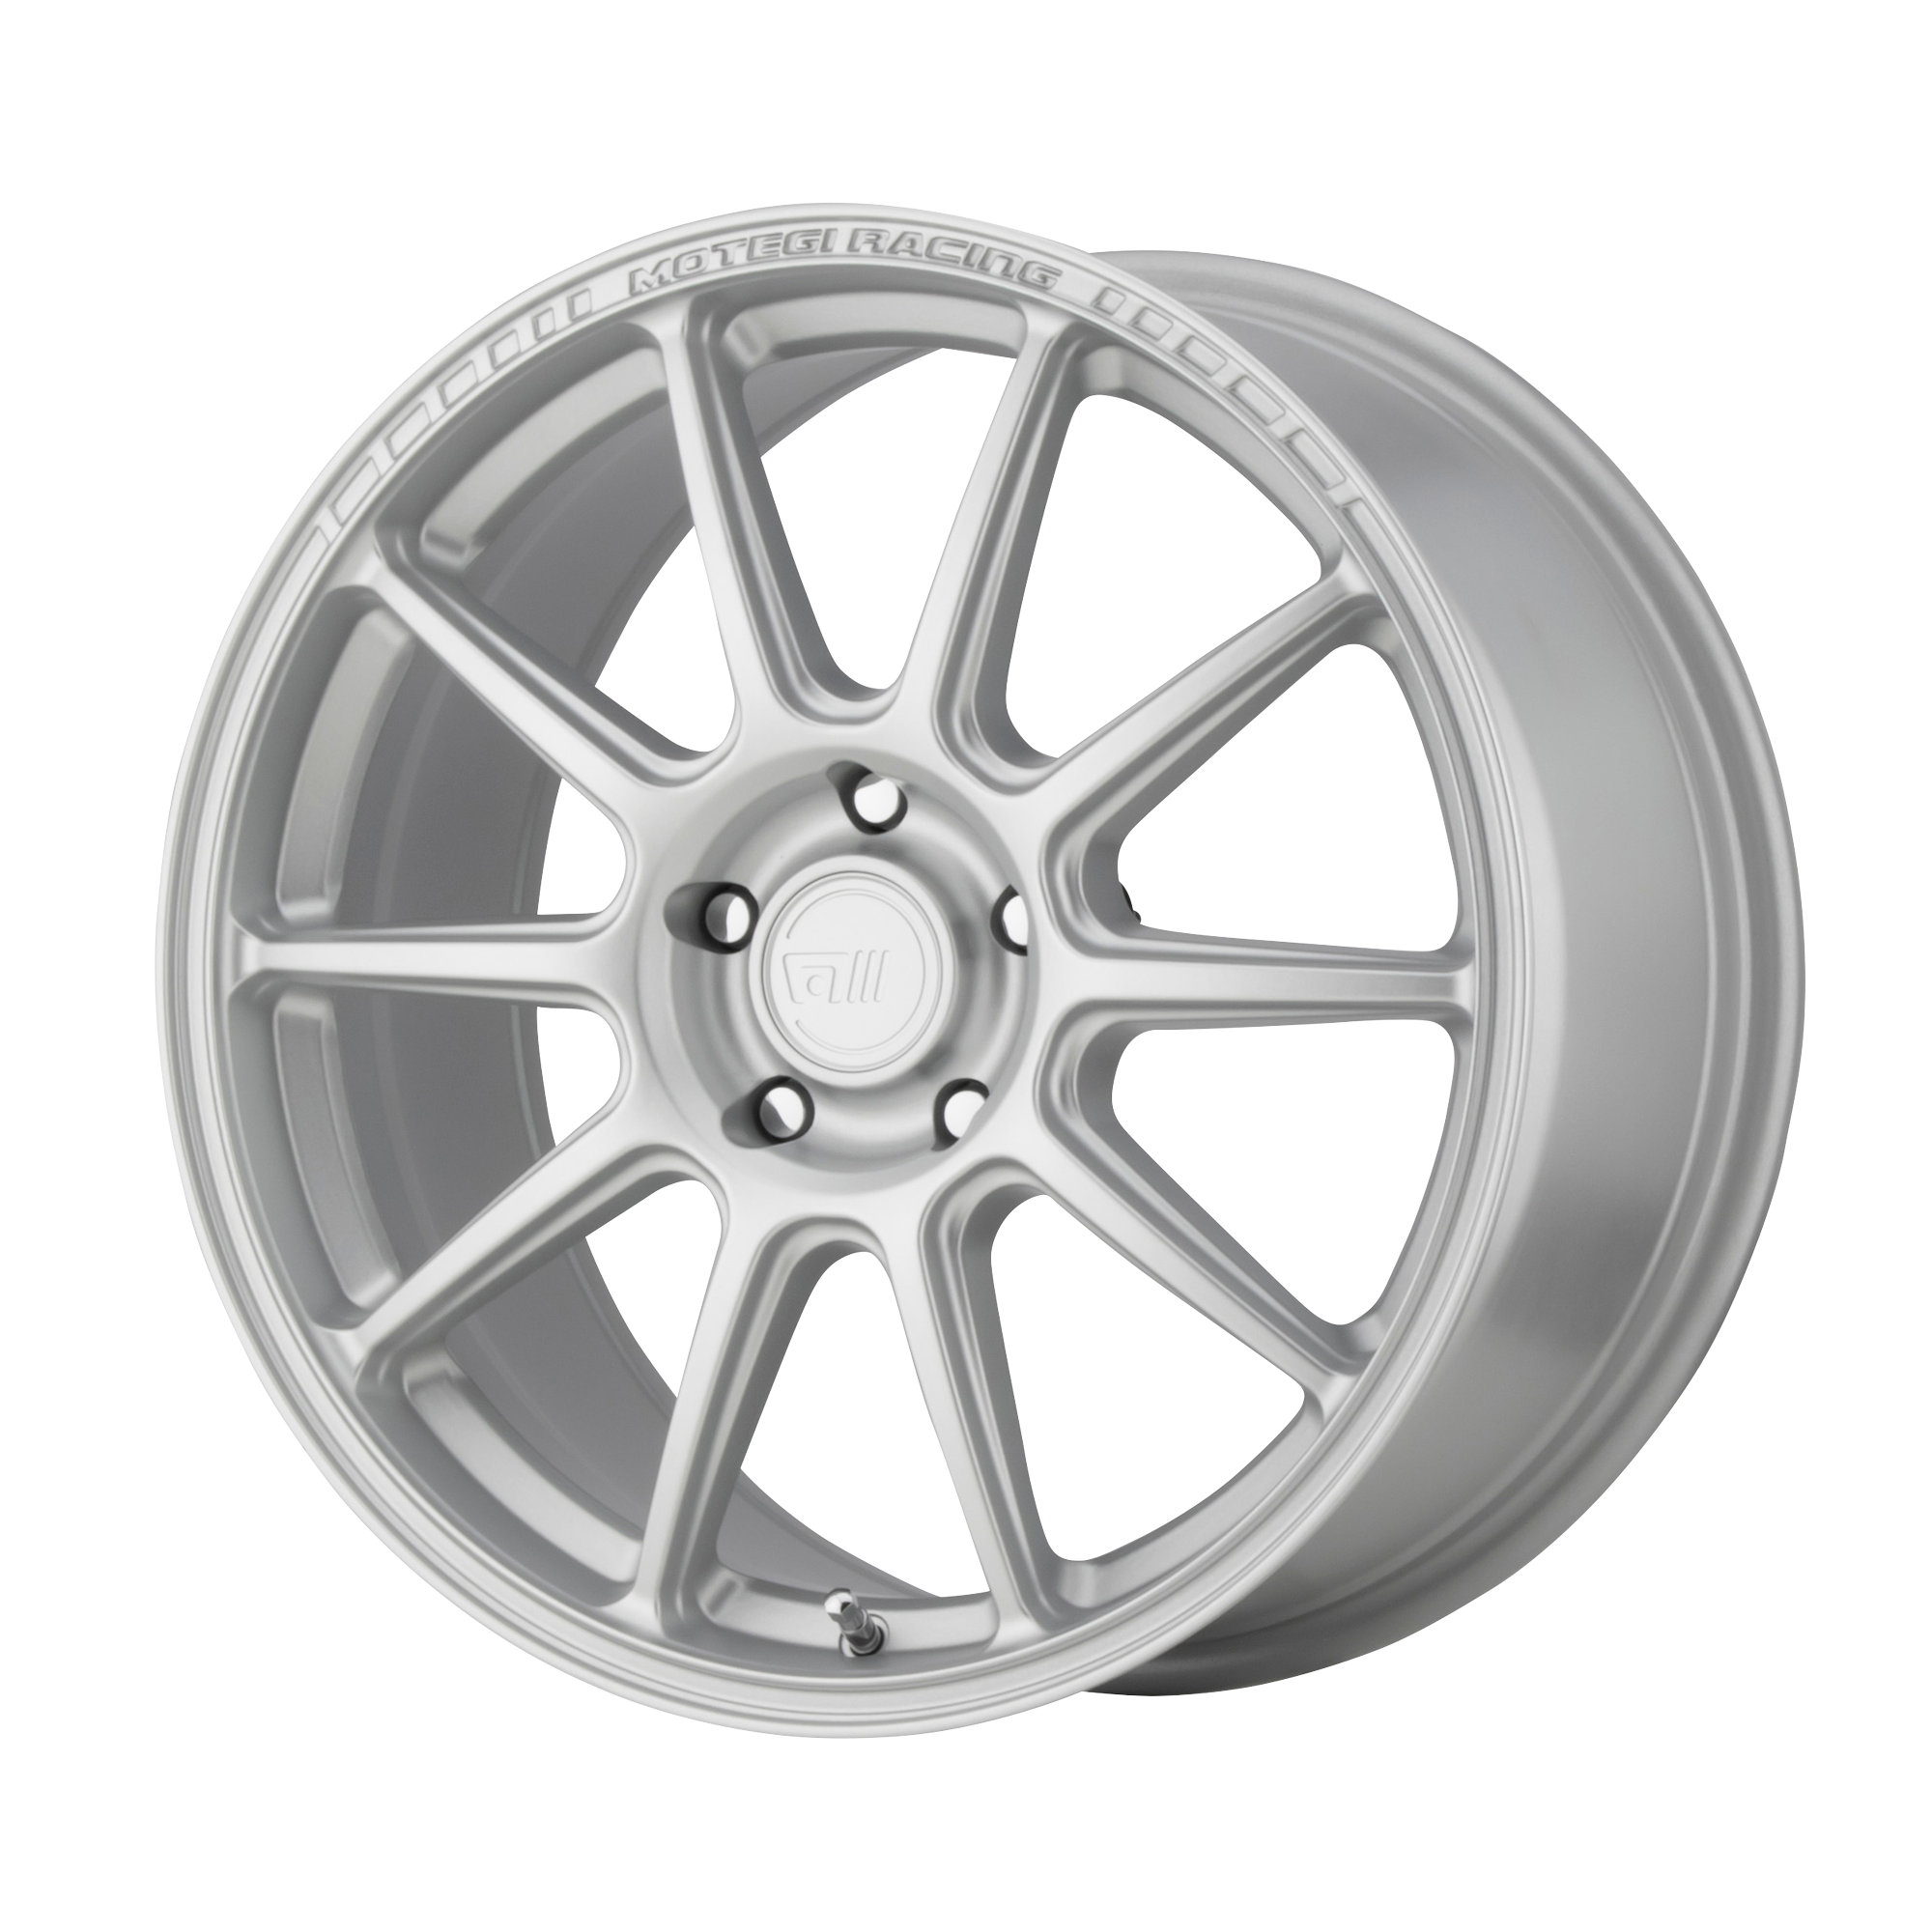 MR140 18x8.5 5x108.00 HYPER SILVER (45 mm) - Tires and Engine Performance